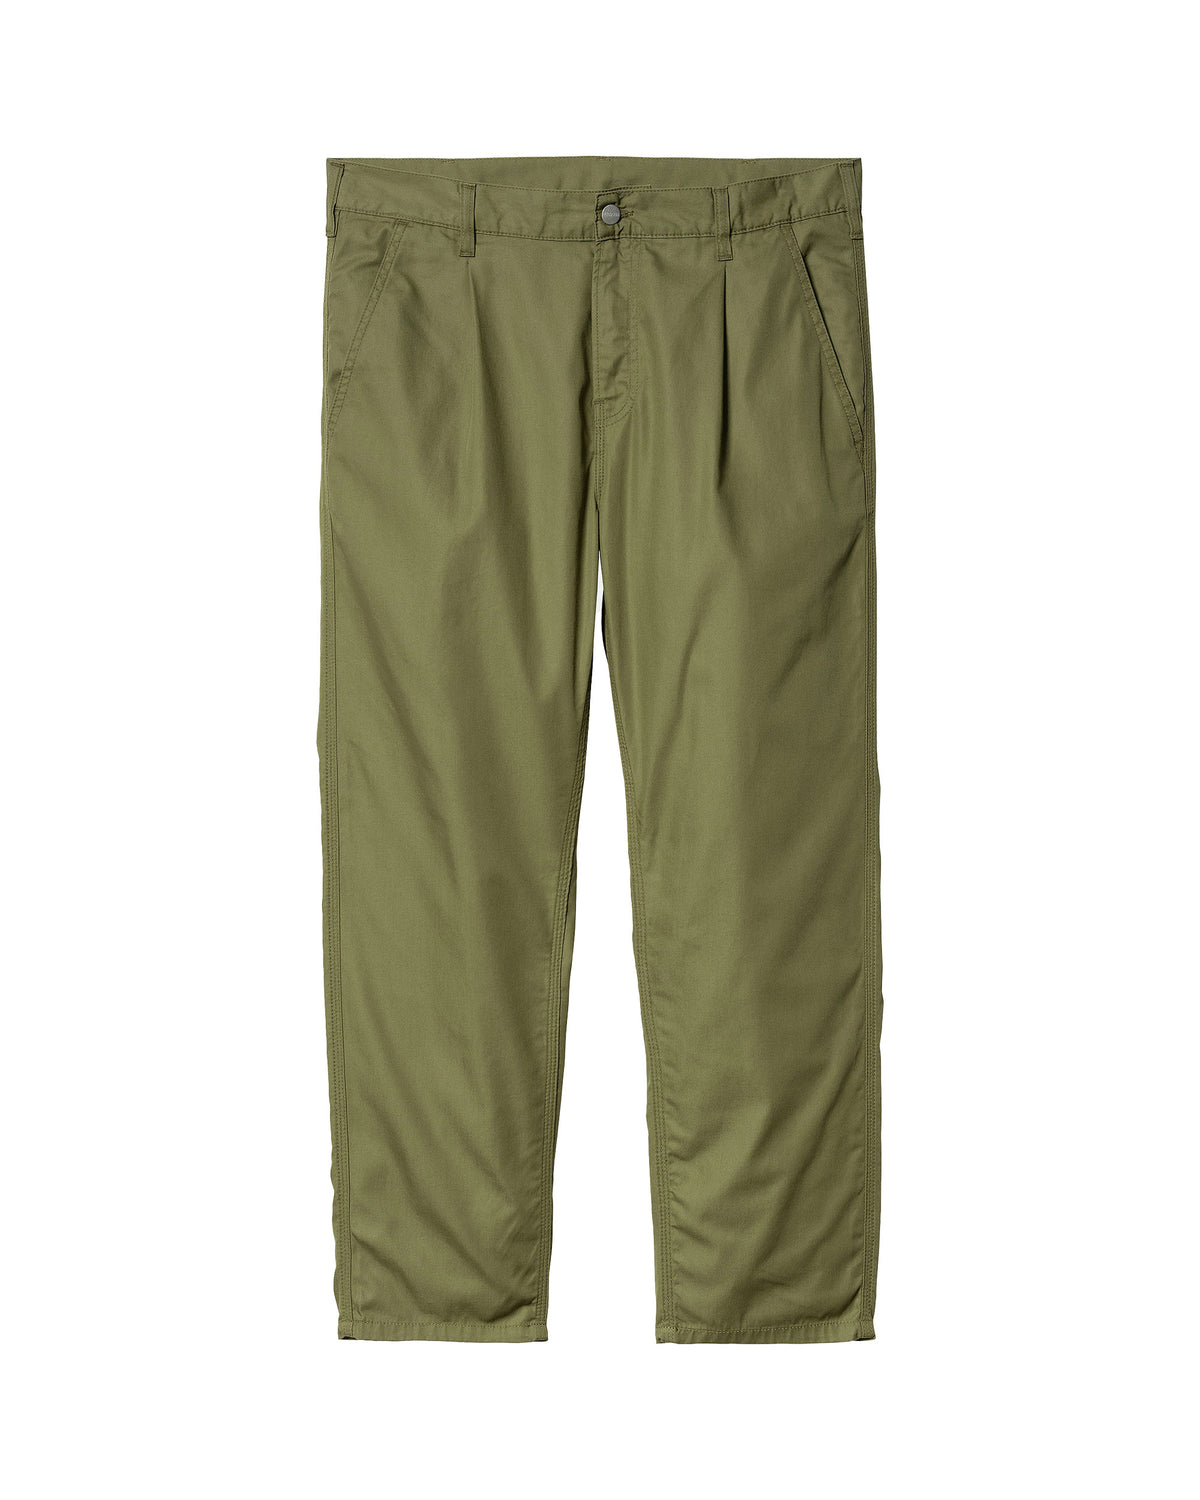 Carhartt Wip Abbot Pant Dundee